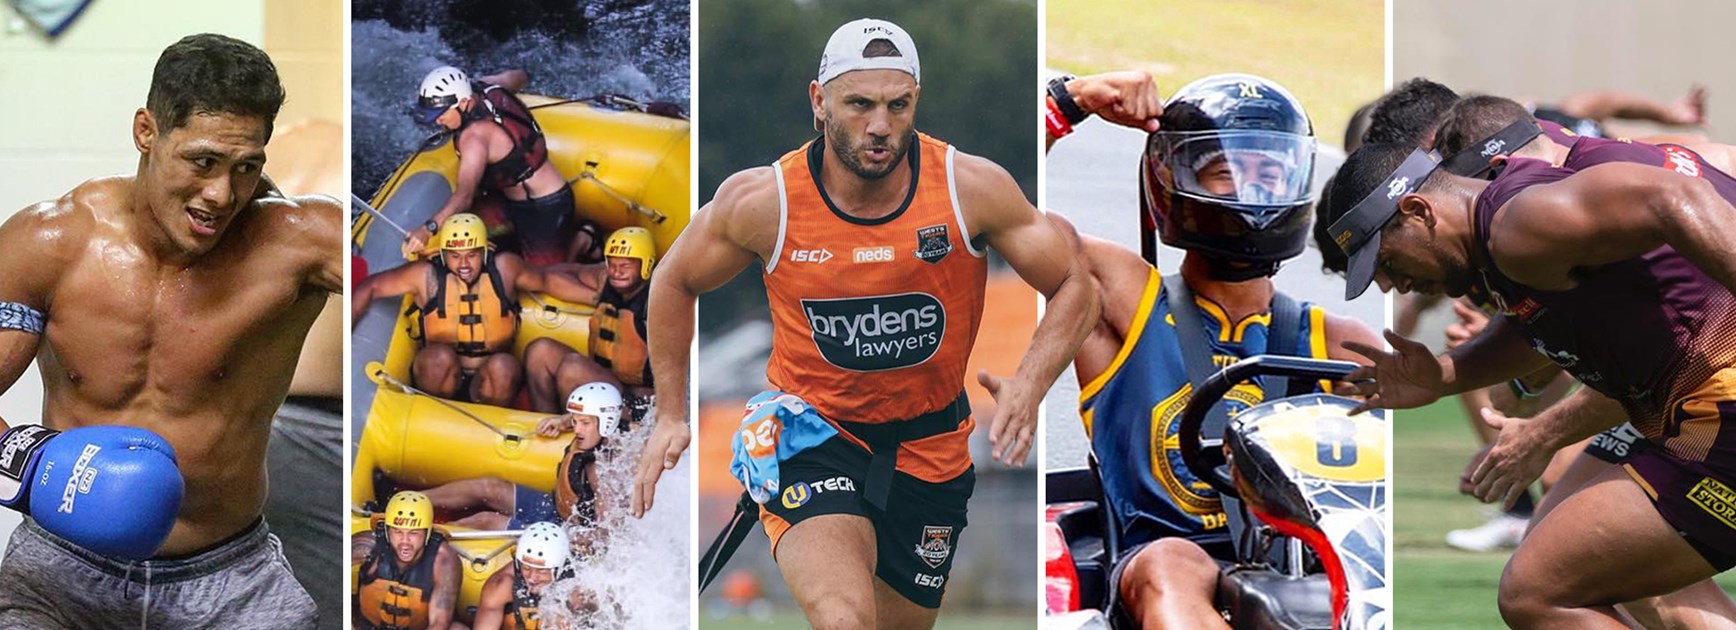 NRL Social: Training, photo shoots and down-time